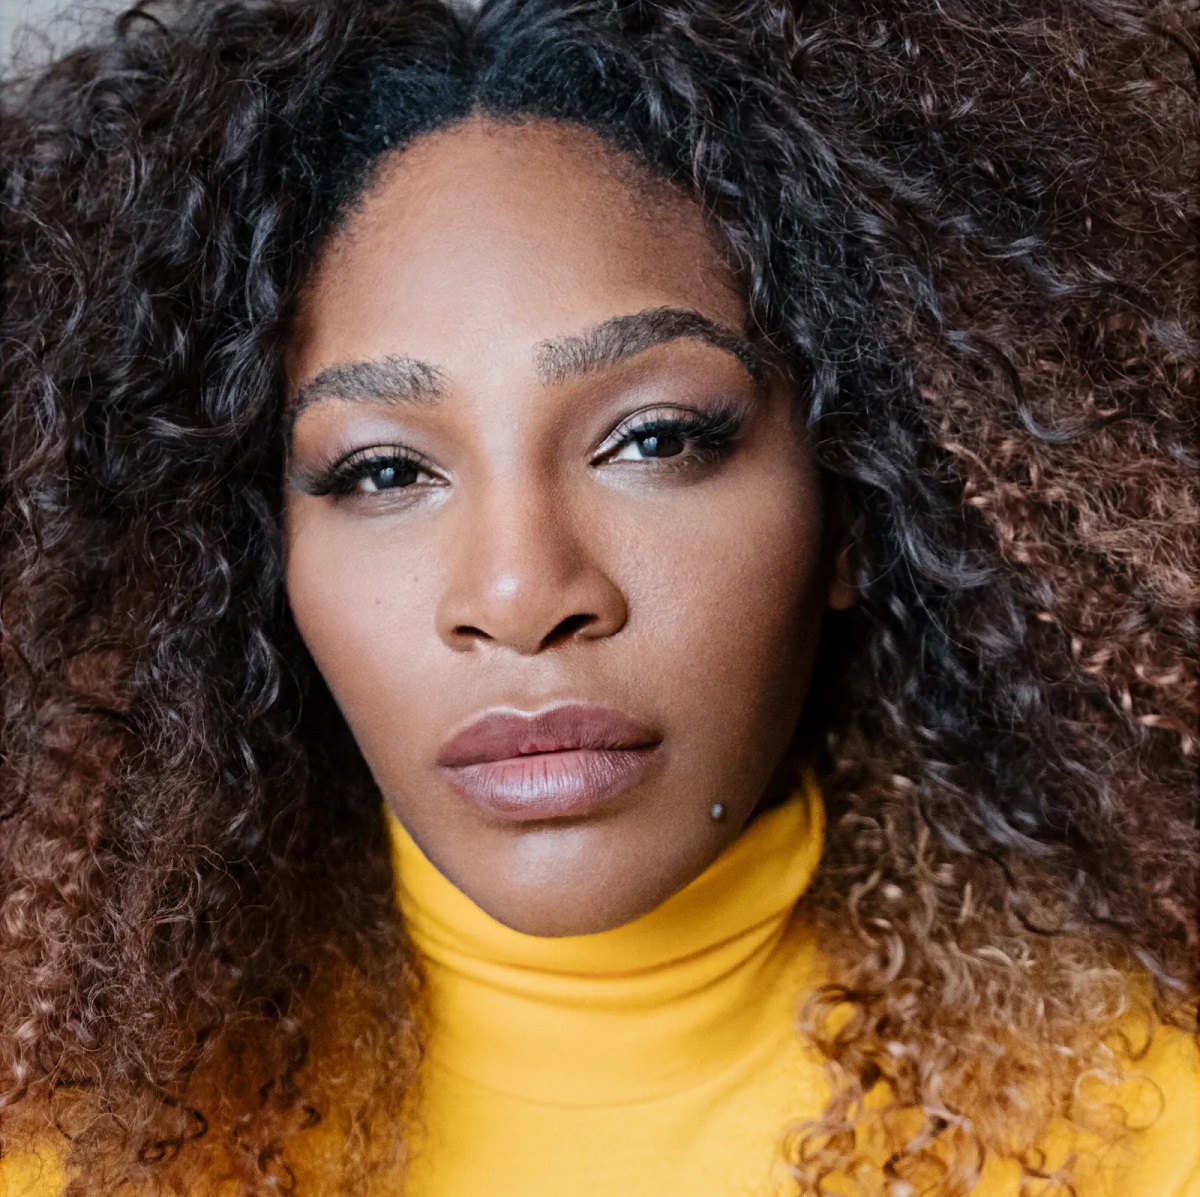 Serena Williams Is the Champion of the Year